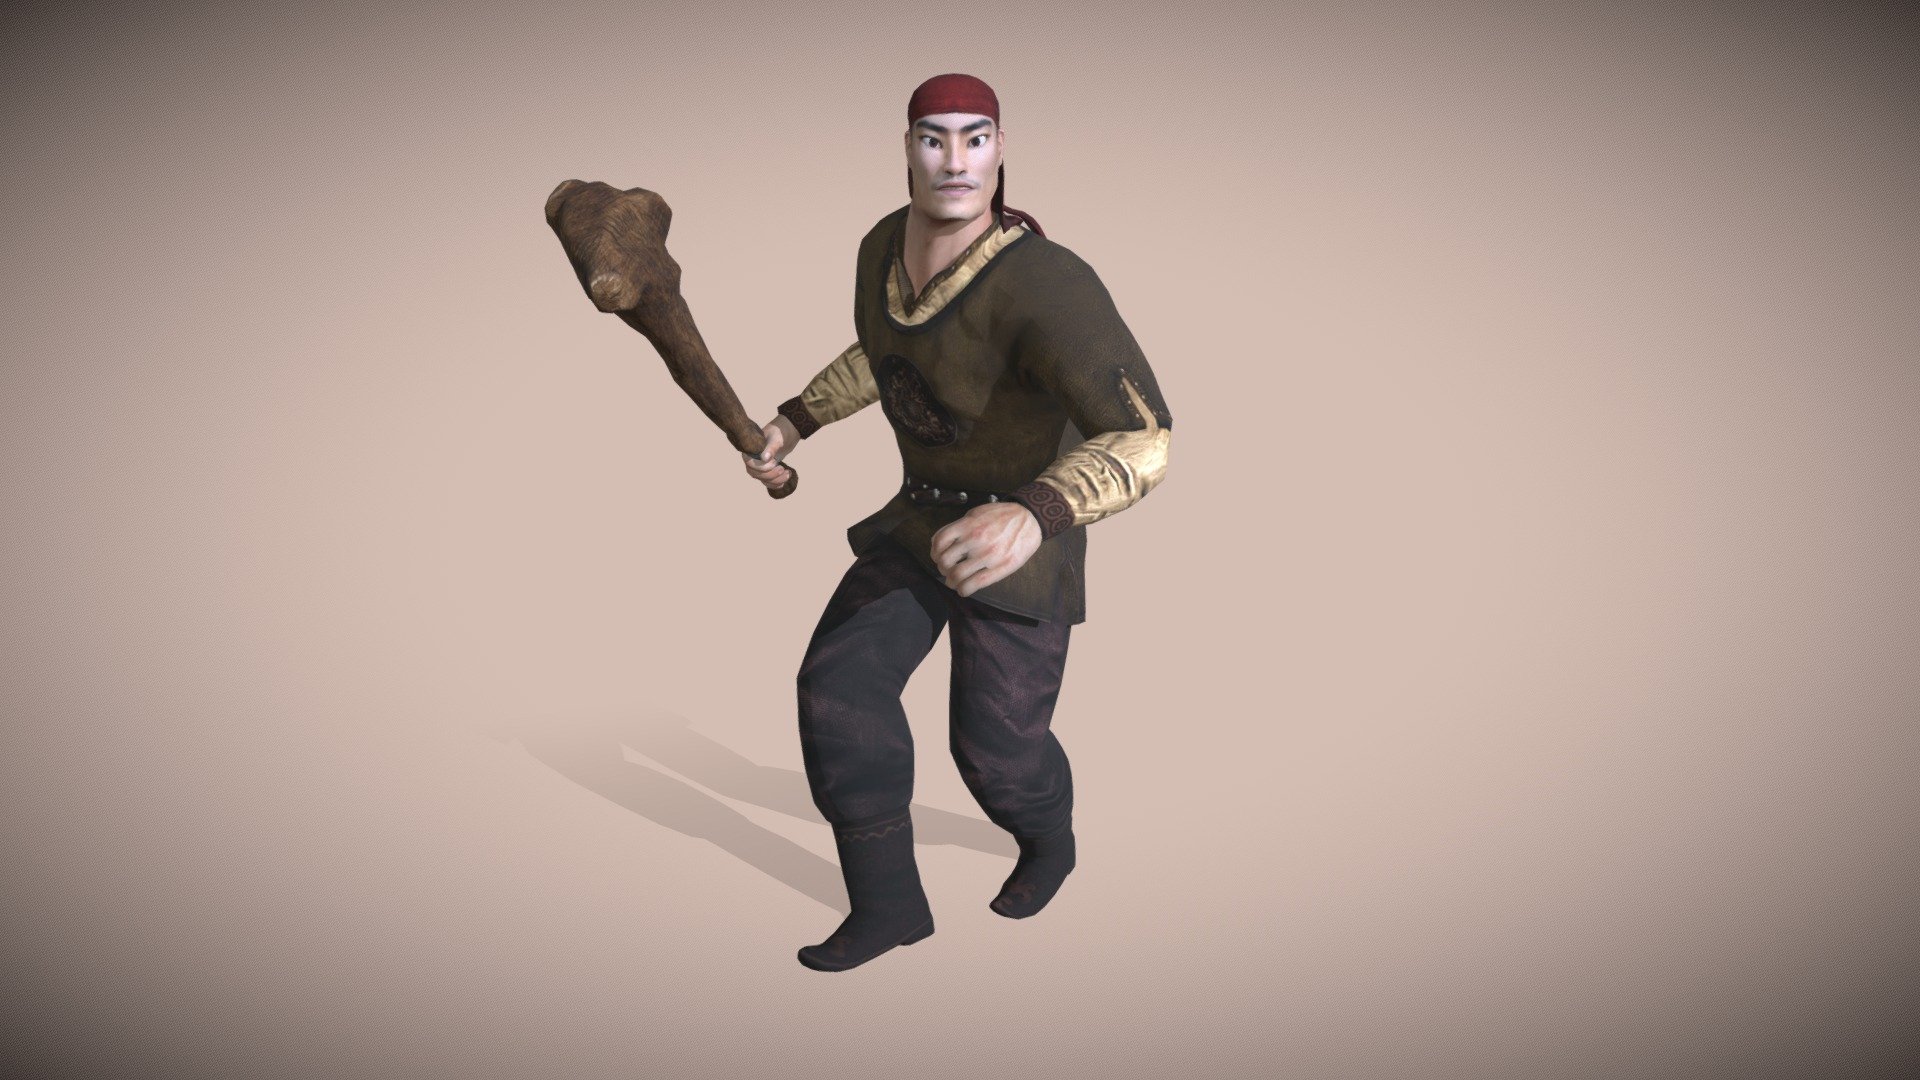 Kambar Batyr with Cudgel Character Animated - Low Poly

Optimized for games (game ready), Suitable for close-UPS, illustrations and various renderings 3d model